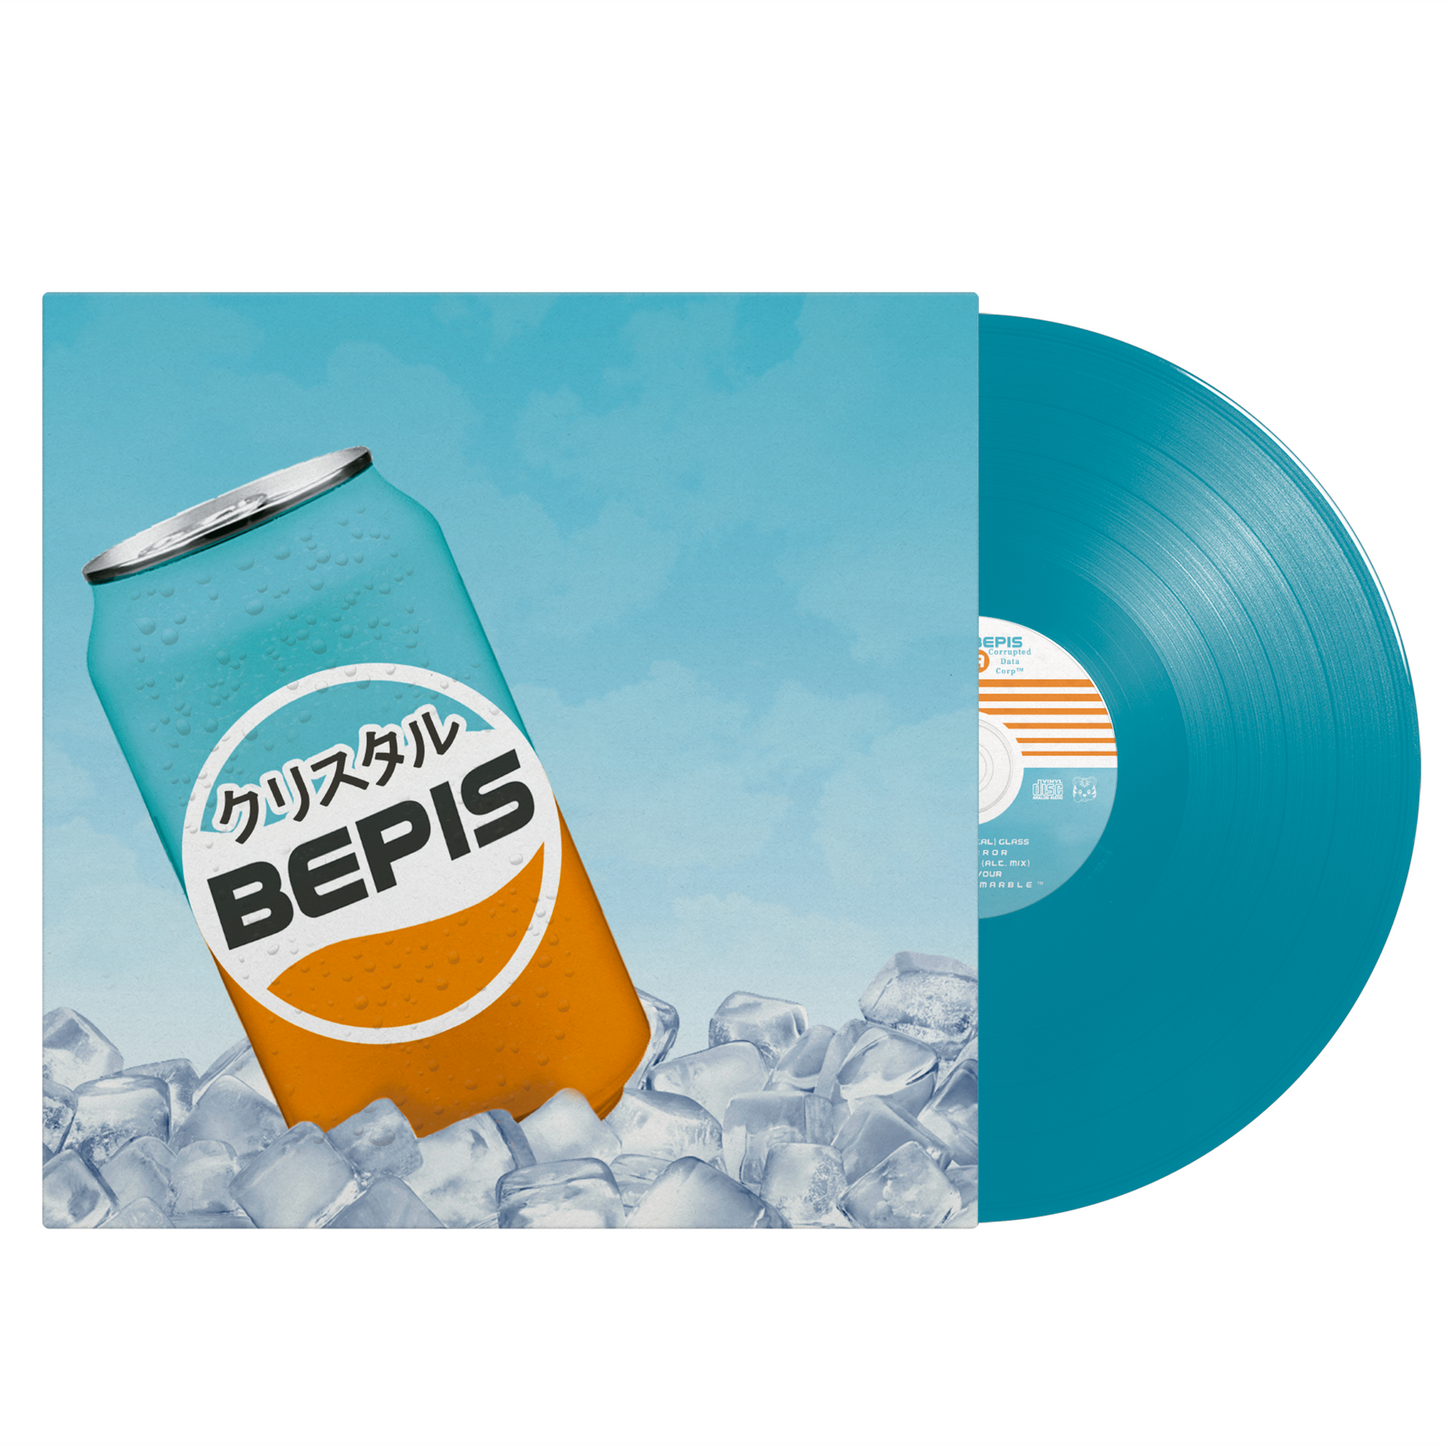 Corrupted Data Corp - "BEPIS" Limited Edition Freeze Blue Vinyl LP